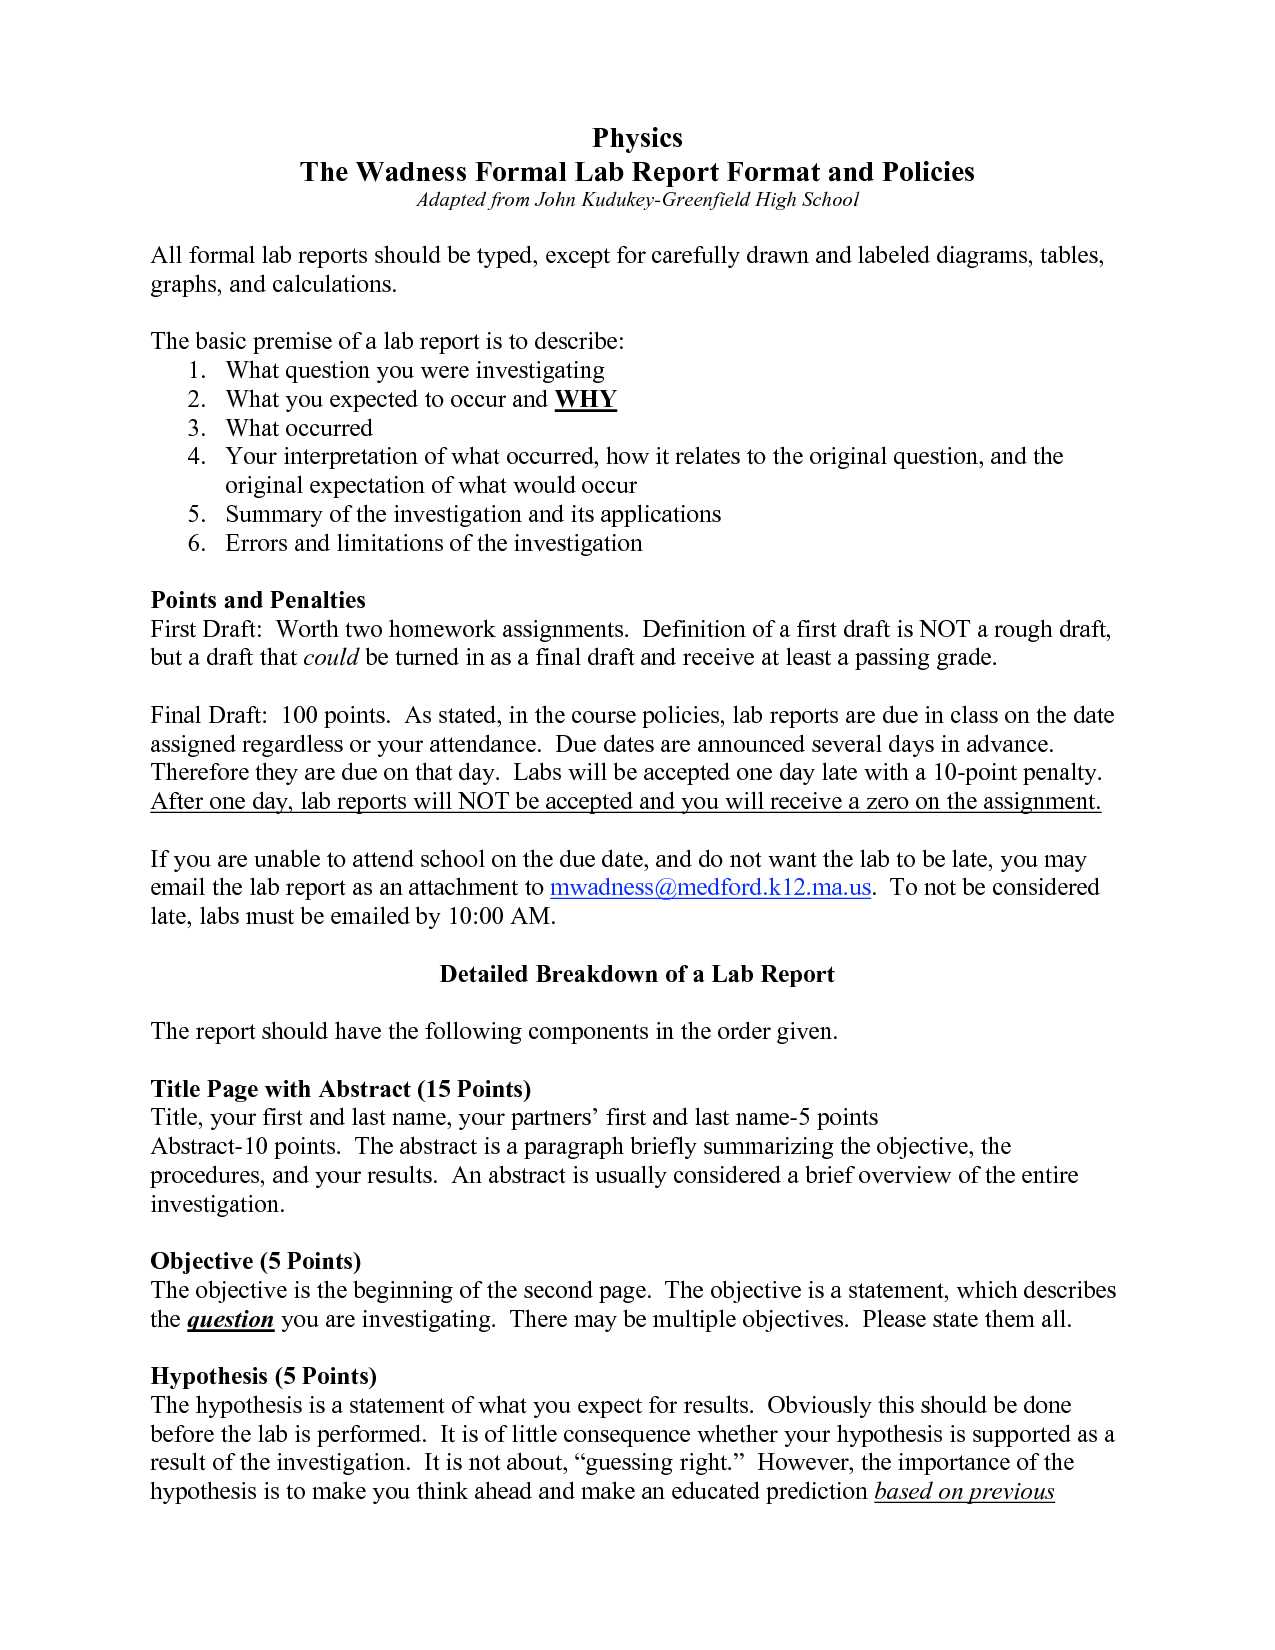 Formal Lab Report Template Physics : Biological Science Regarding Biology Lab Report Template